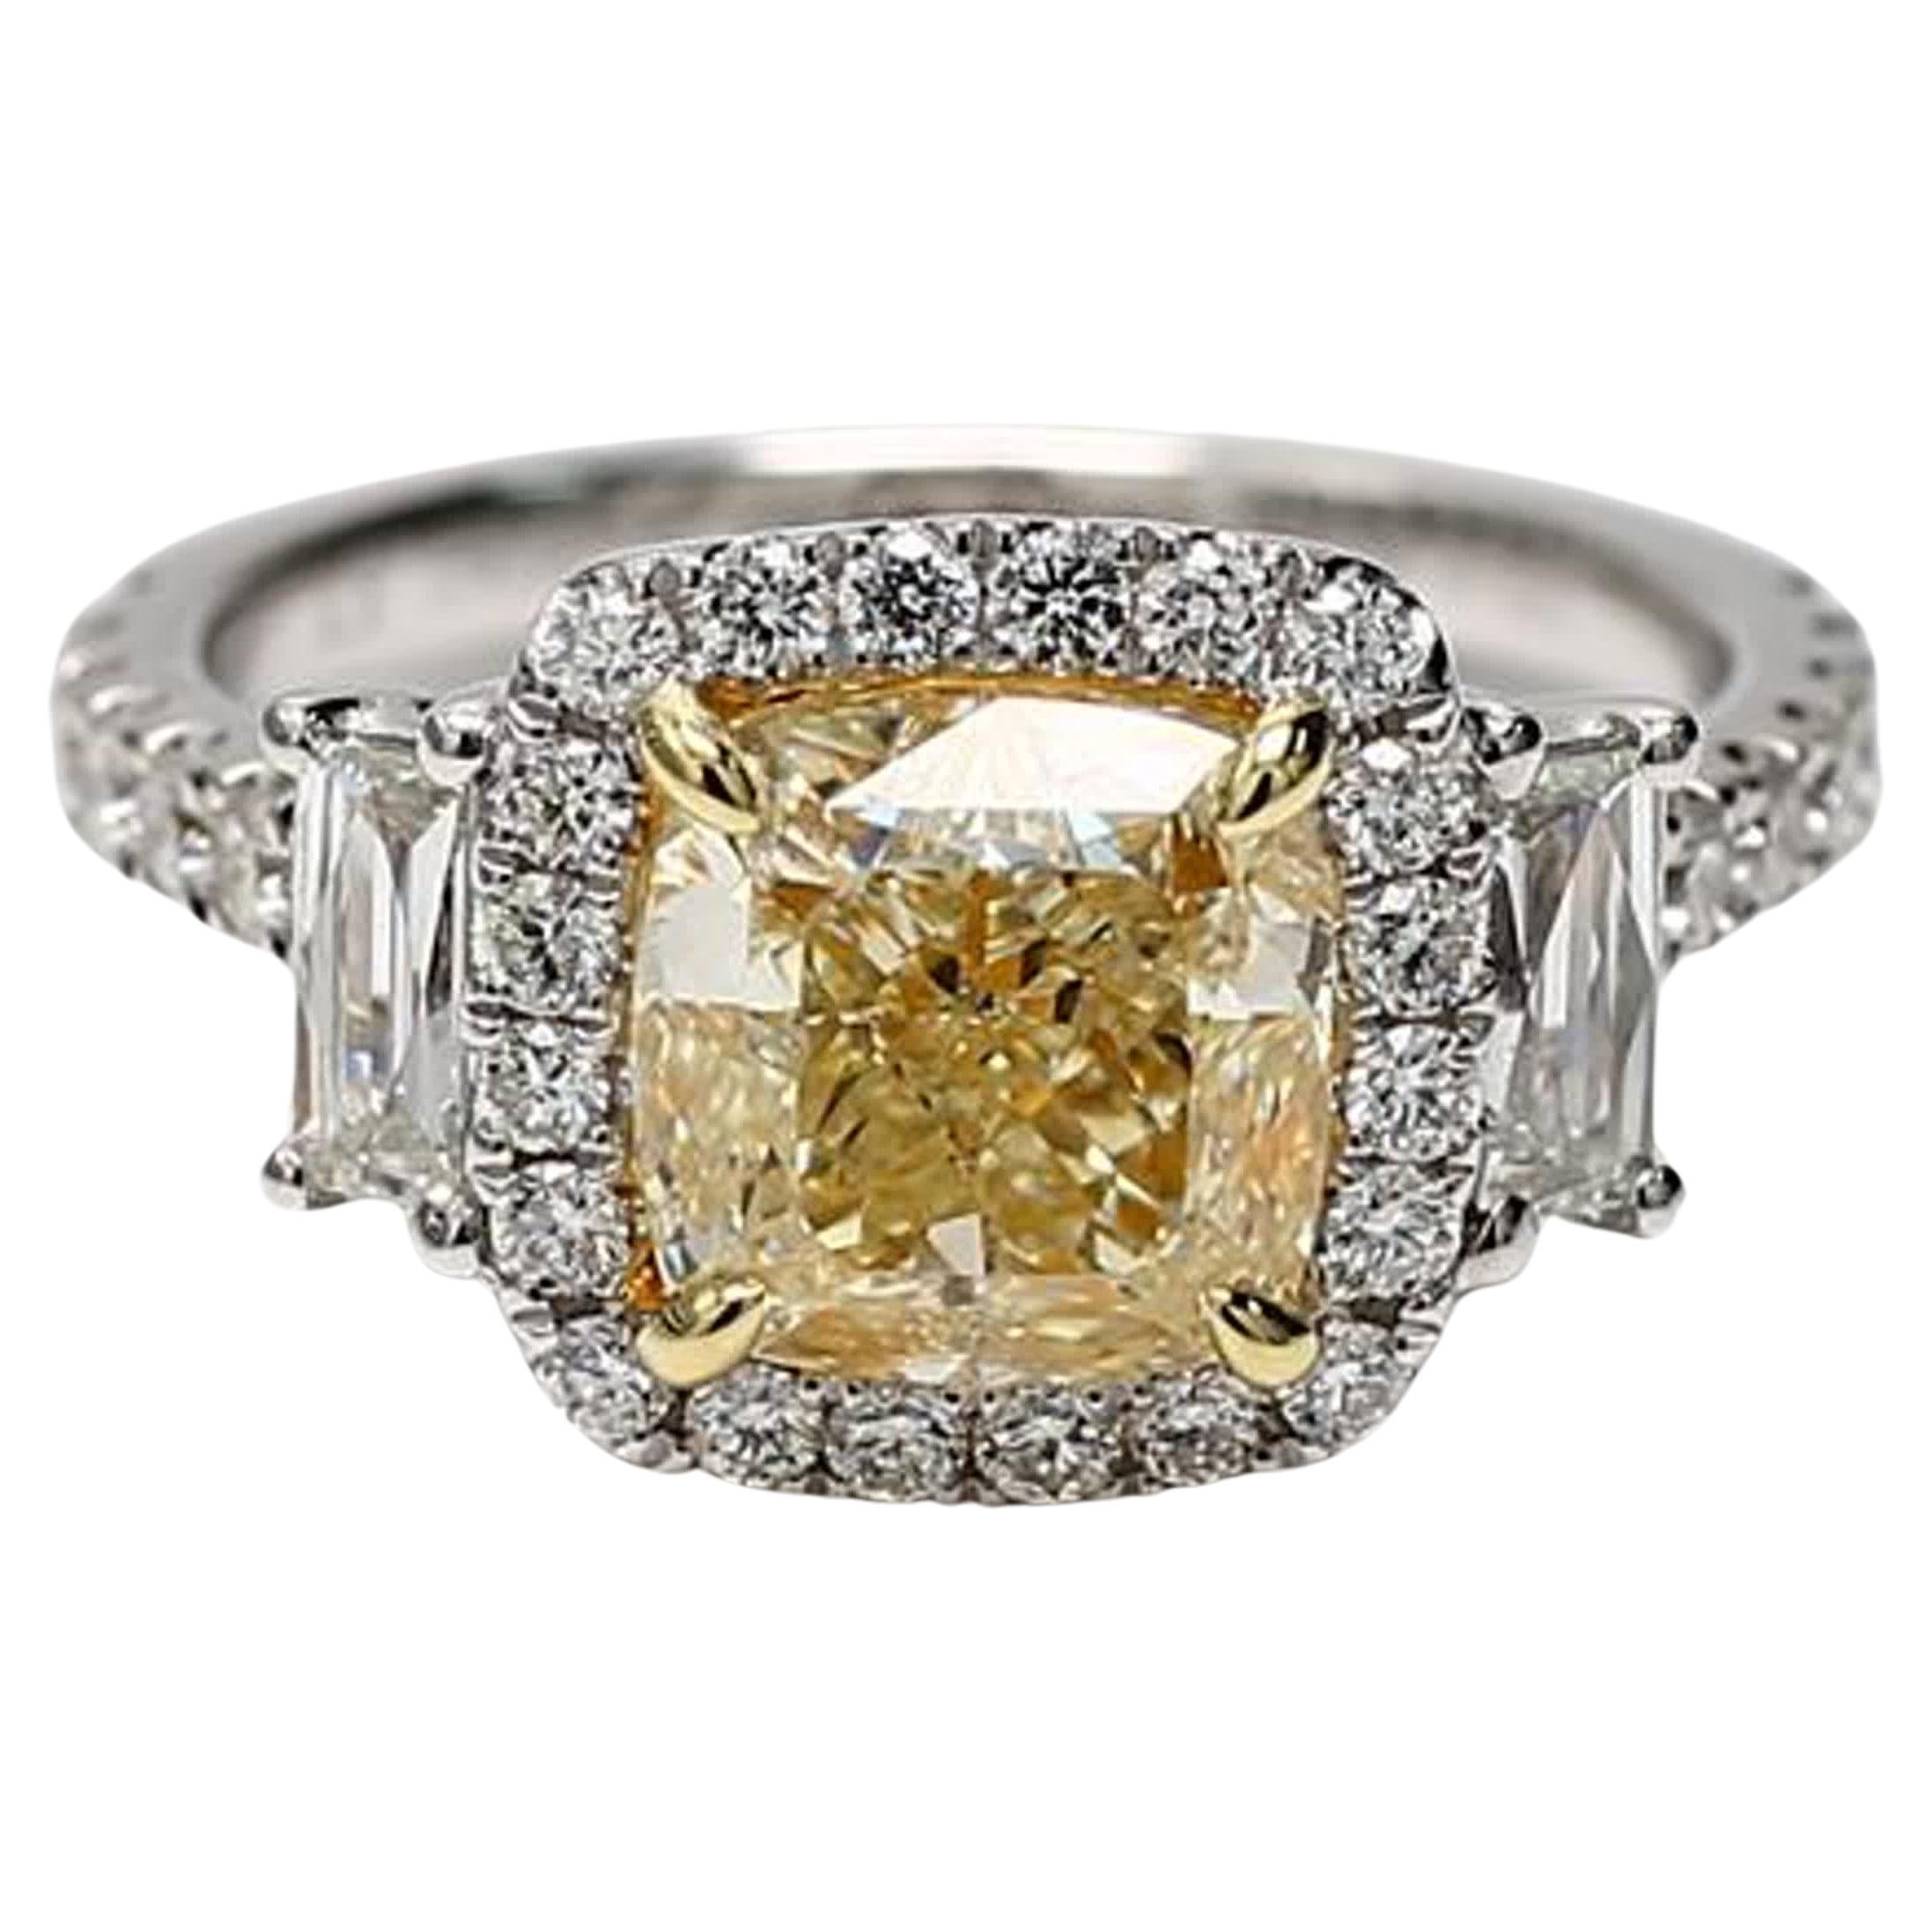 GIA Certified Natural Yellow Cushion and White Diamond 4.05 Carat TW Gold Ring